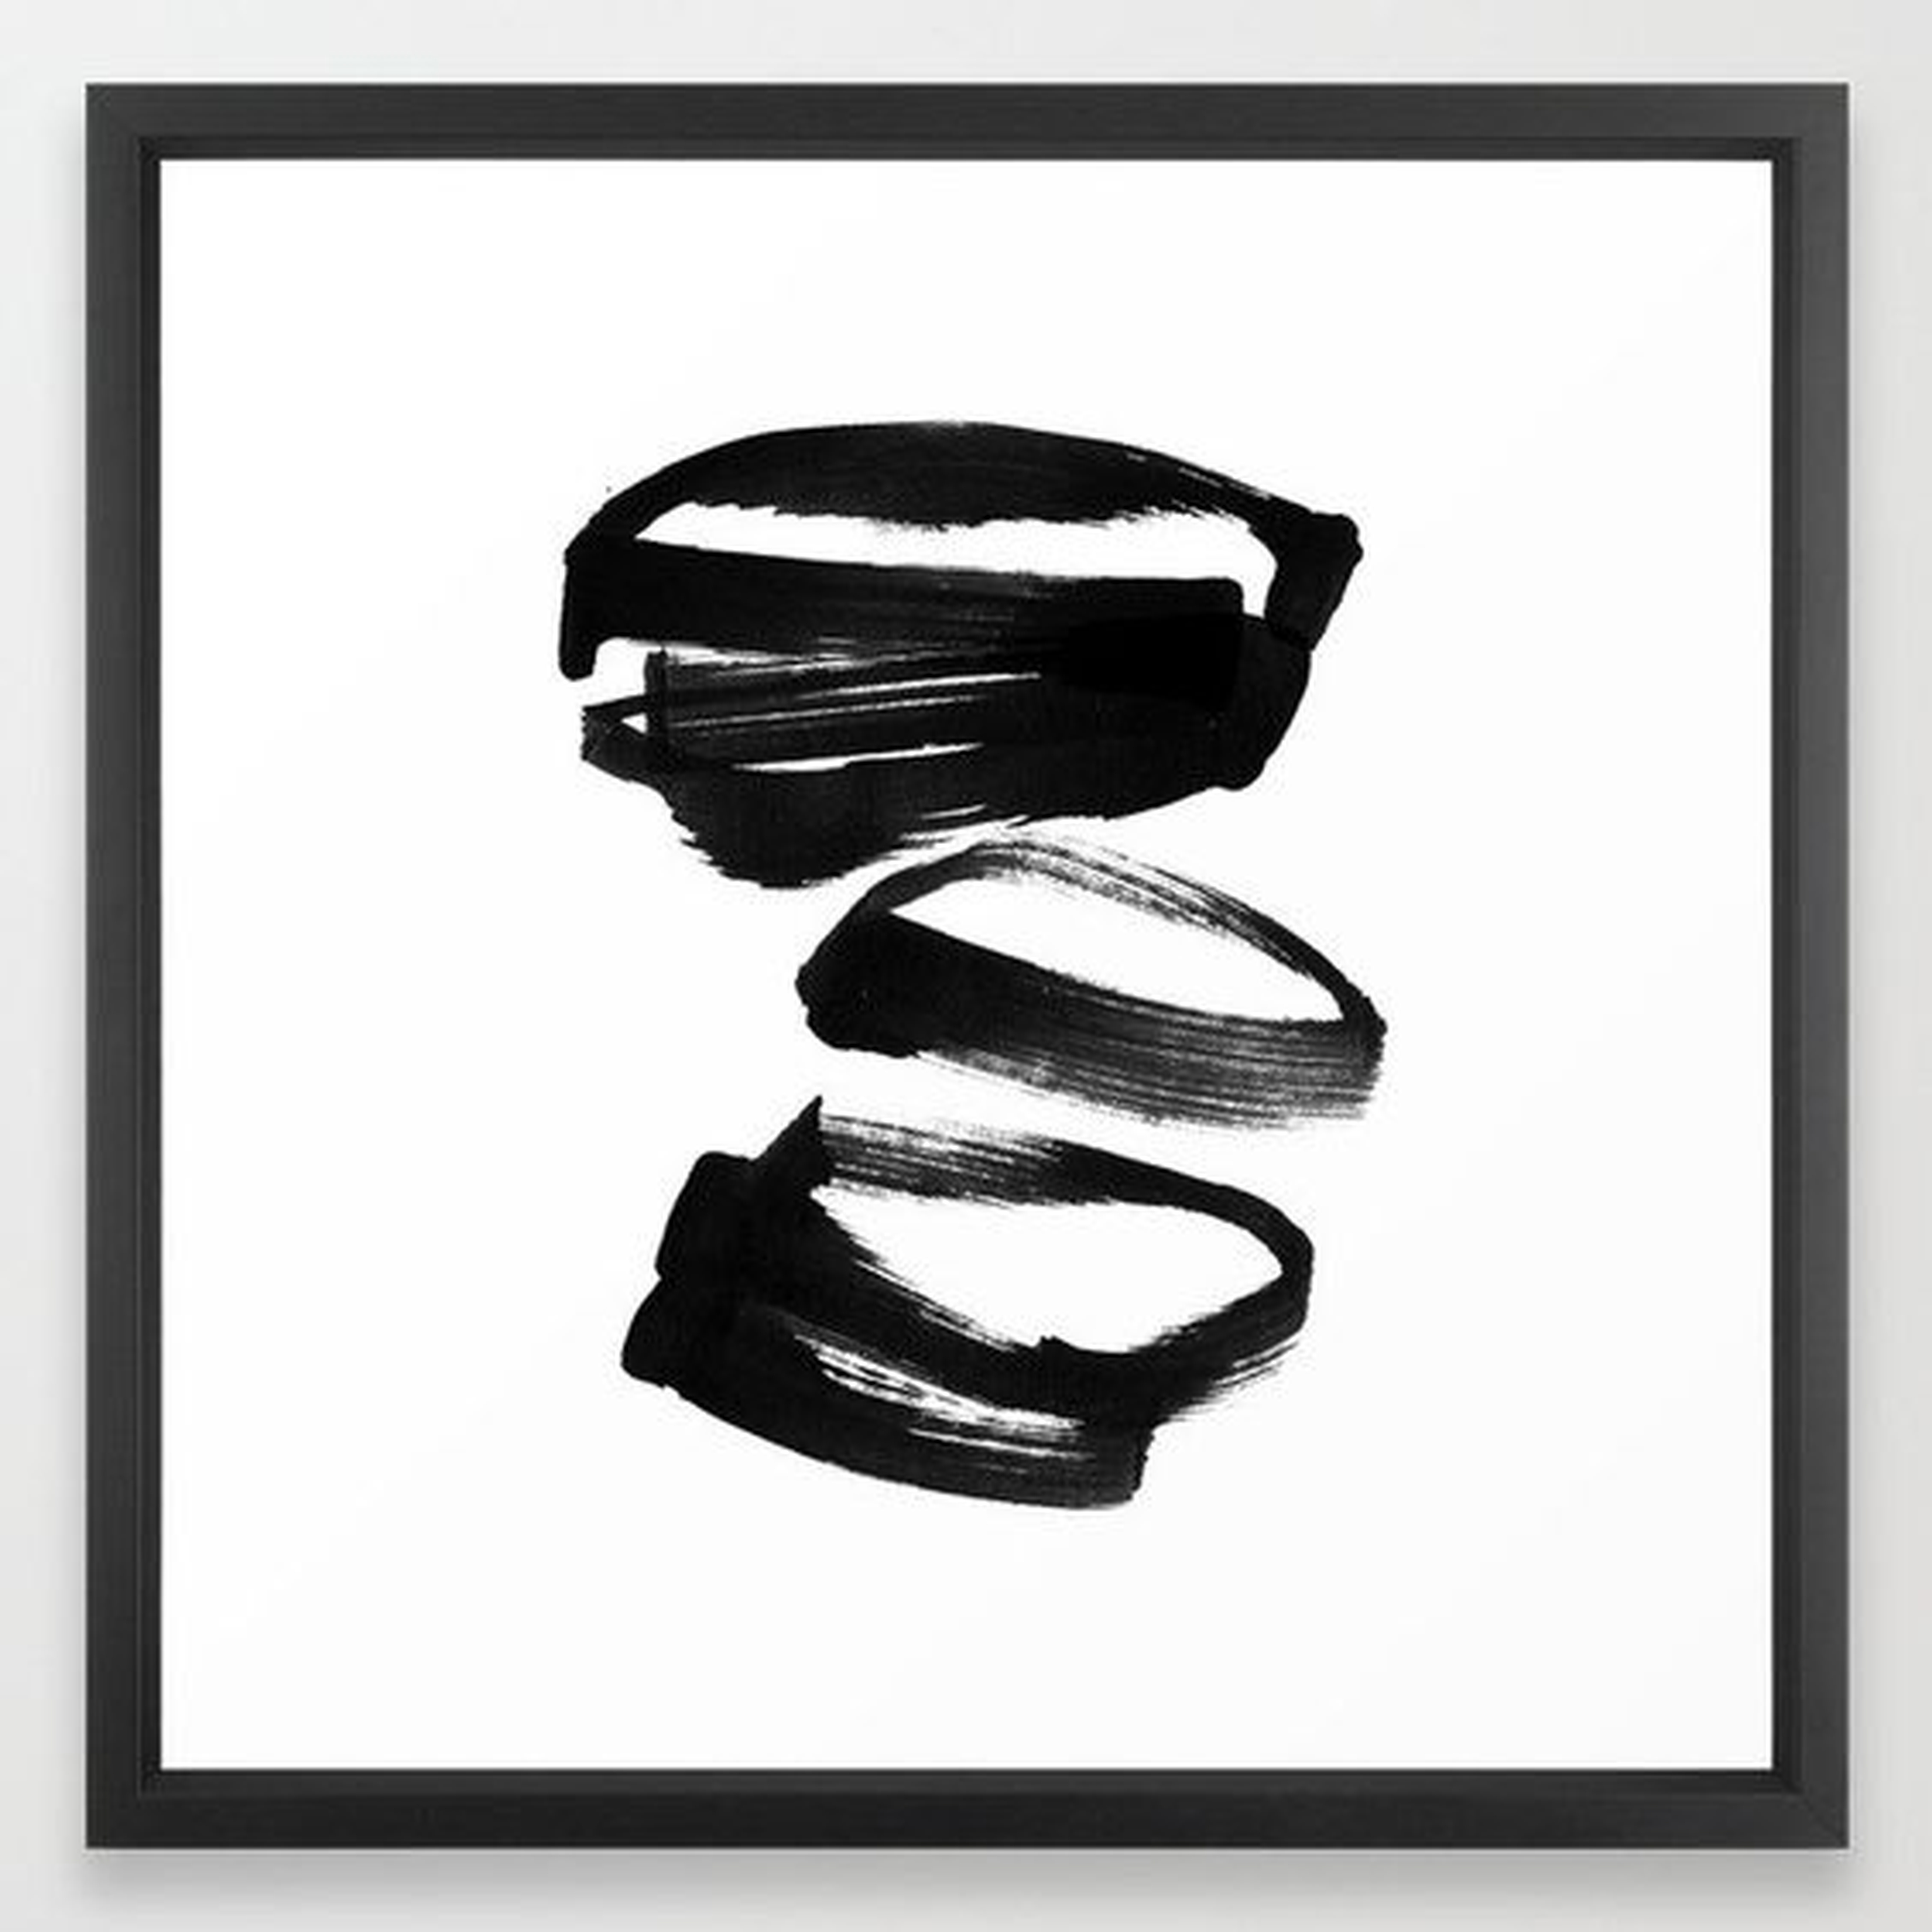 Black and White Abstract Shapes Ink Painting Framed Art Print - 22 x 22" vector black frame - Society6